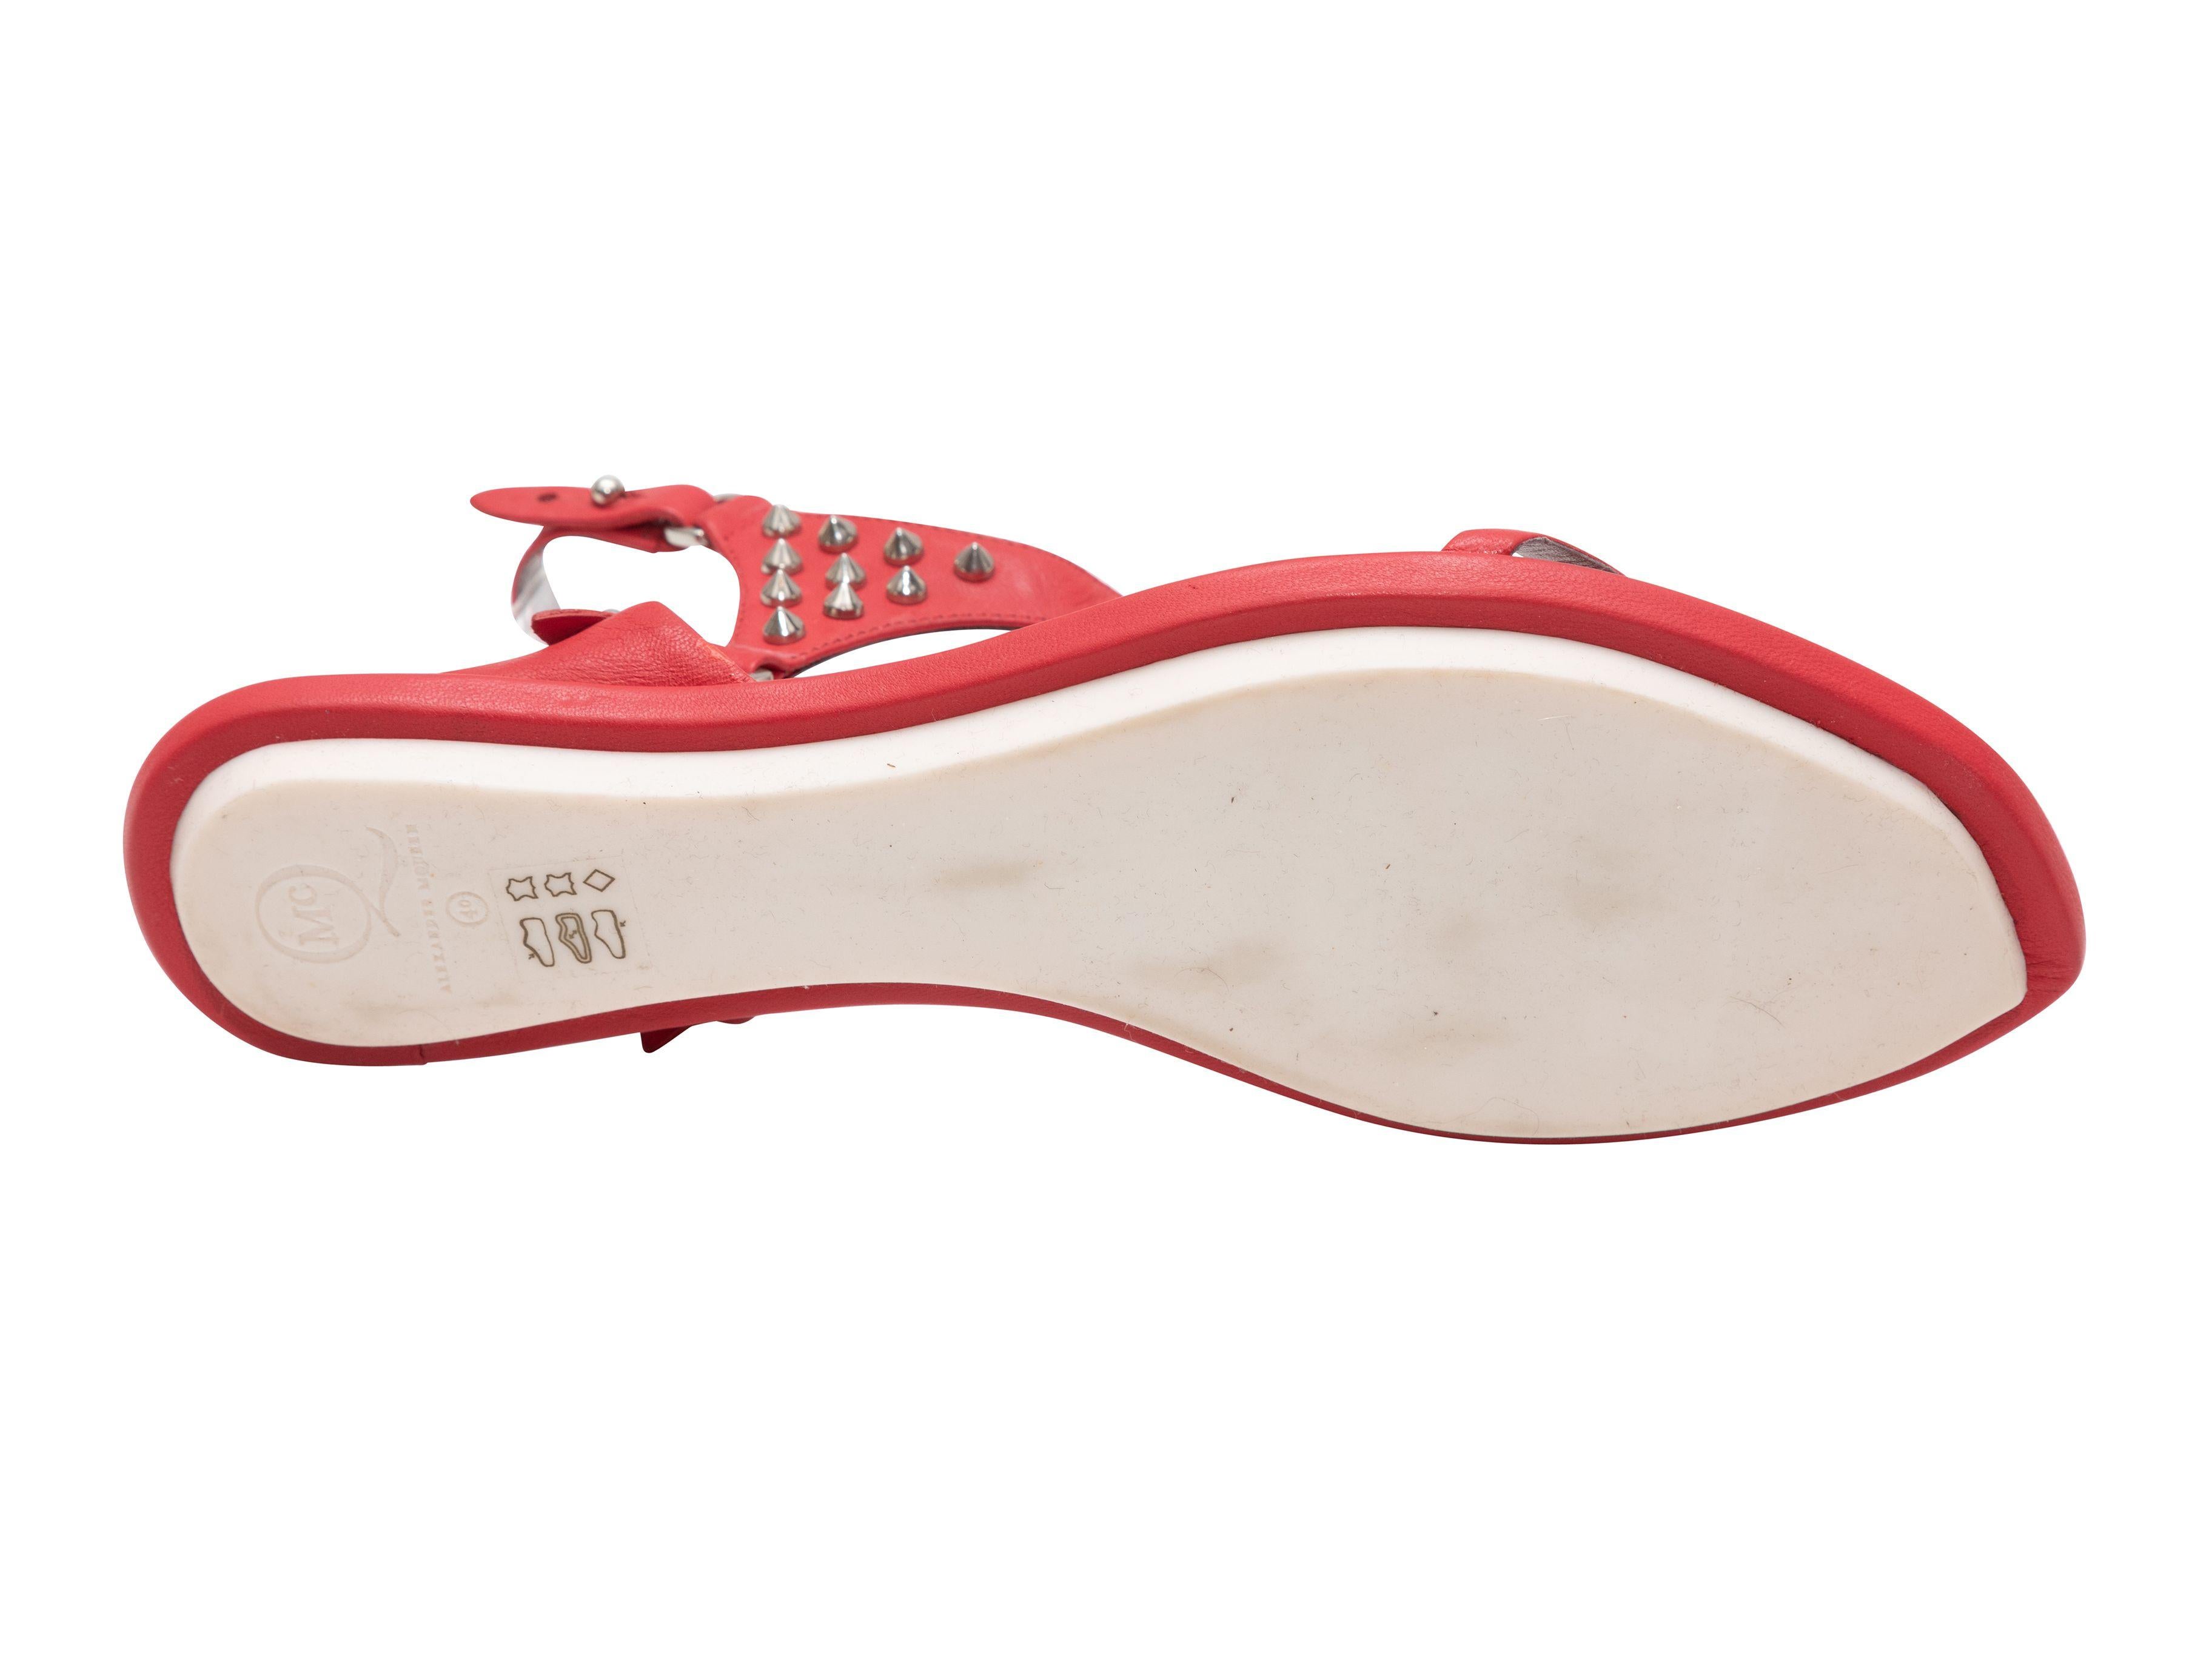 Product Details: Red leather studded flat sandals by McQ Alexander McQueen. Buckle closures at ankle straps.

Designer Size: 40
US Recommended Size: 10

Condition: Pre-owned. Very good. Light wear throughout. 